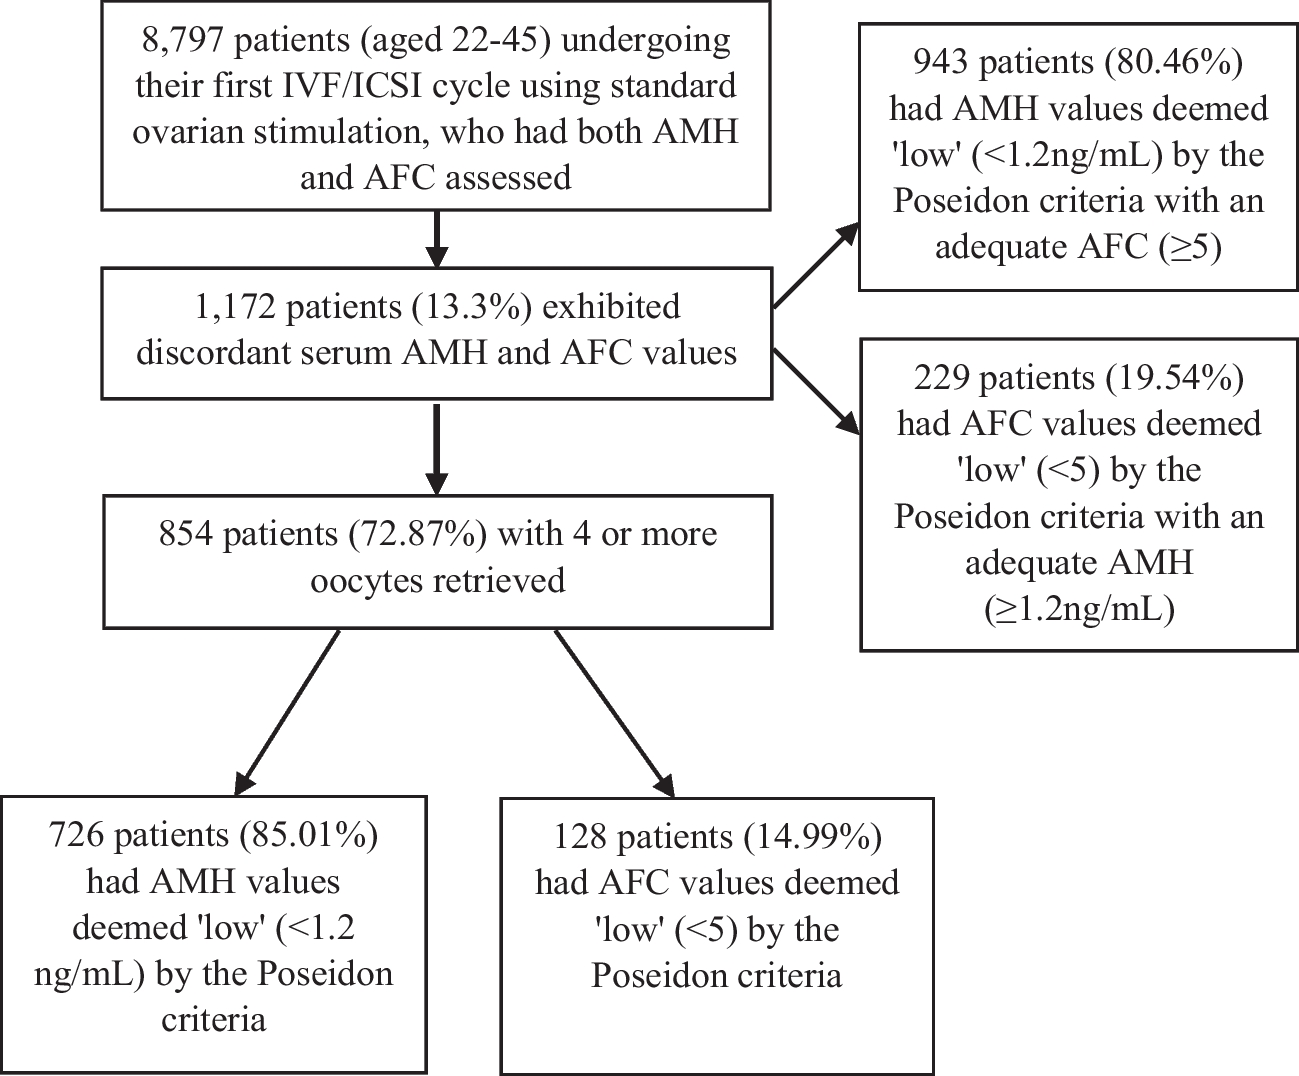 Significance of serum AMH and antral follicle count discrepancy for the prediction of ovarian stimulation response in Poseidon criteria patients